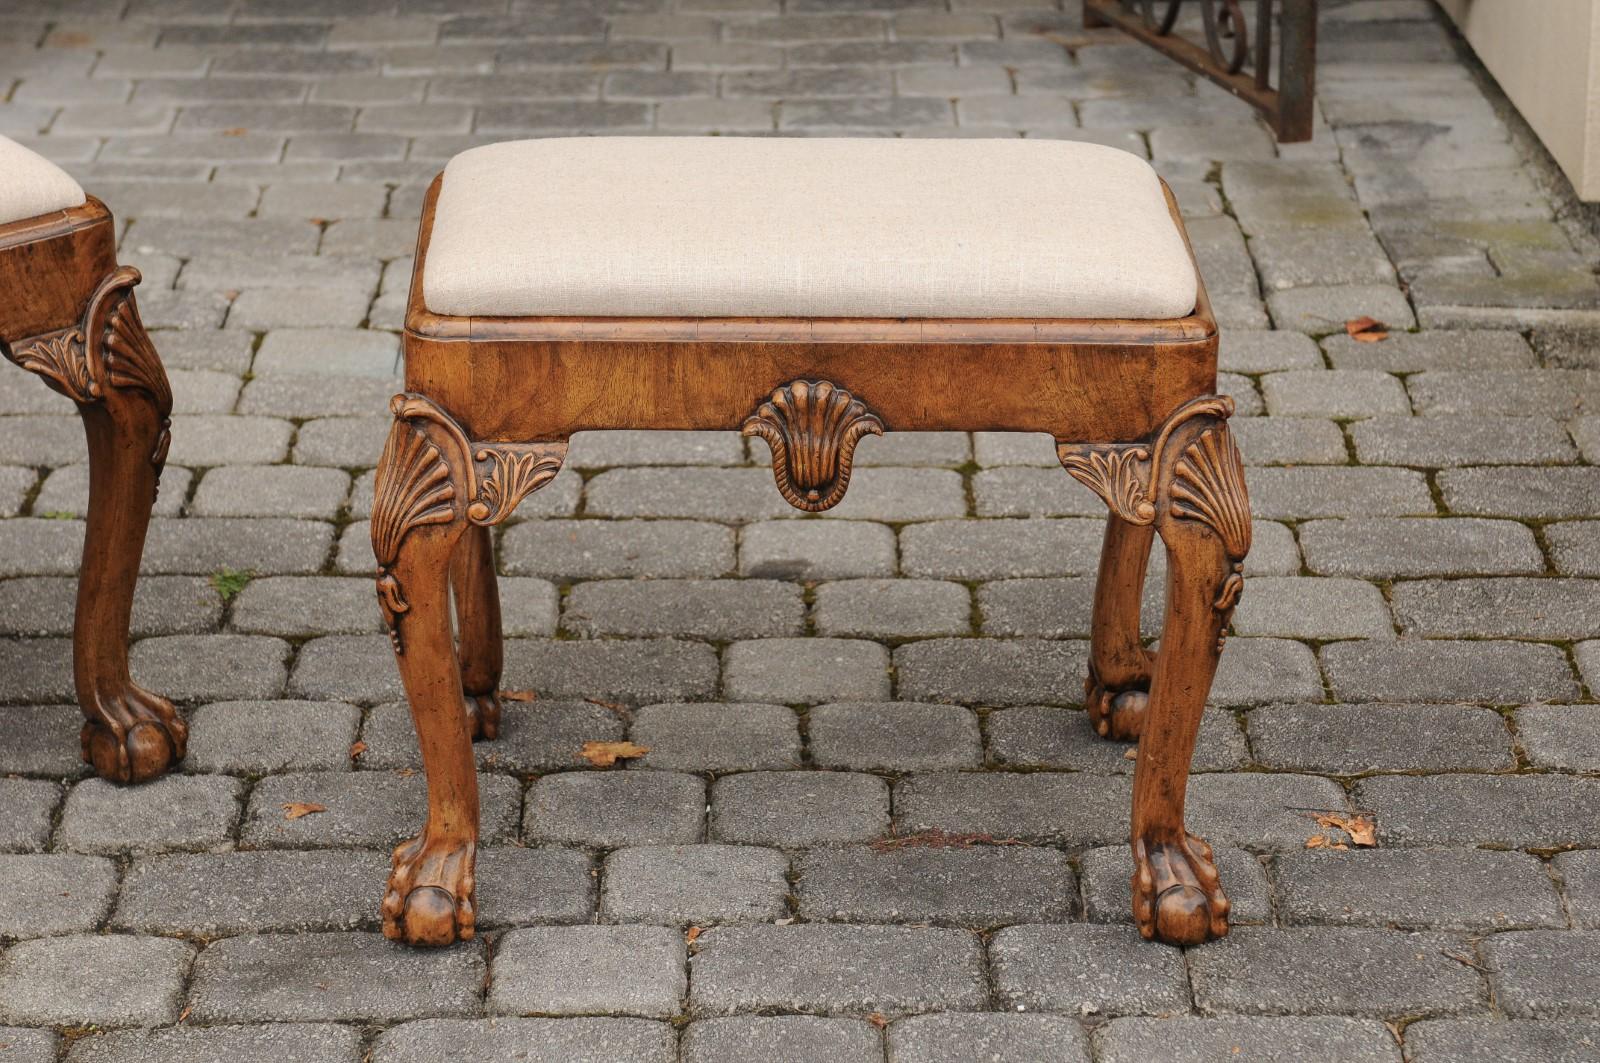 A pair of English Queen Anne style walnut stools from the early 20th century, with carved shells, ball and claw feet and new upholstery. Born during the first quarter of the 20th century, each of this pair of English Queen Anne style stools features